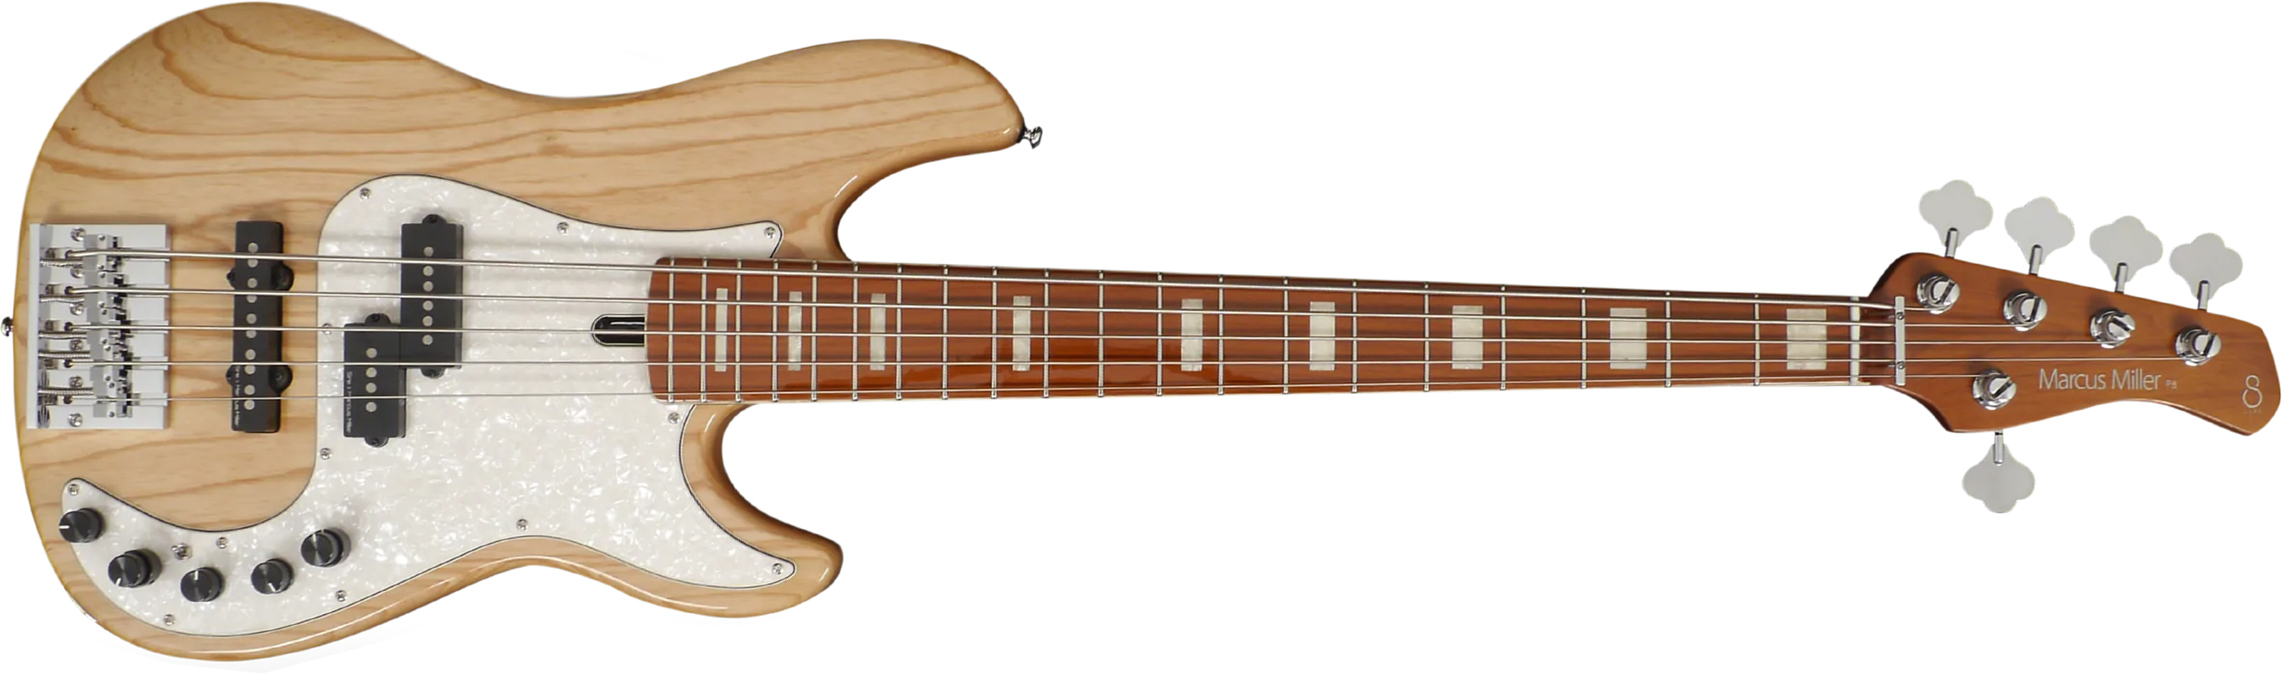 Marcus Miller P8 5st 5c Active Mn - Natural - Solidbody E-bass - Main picture